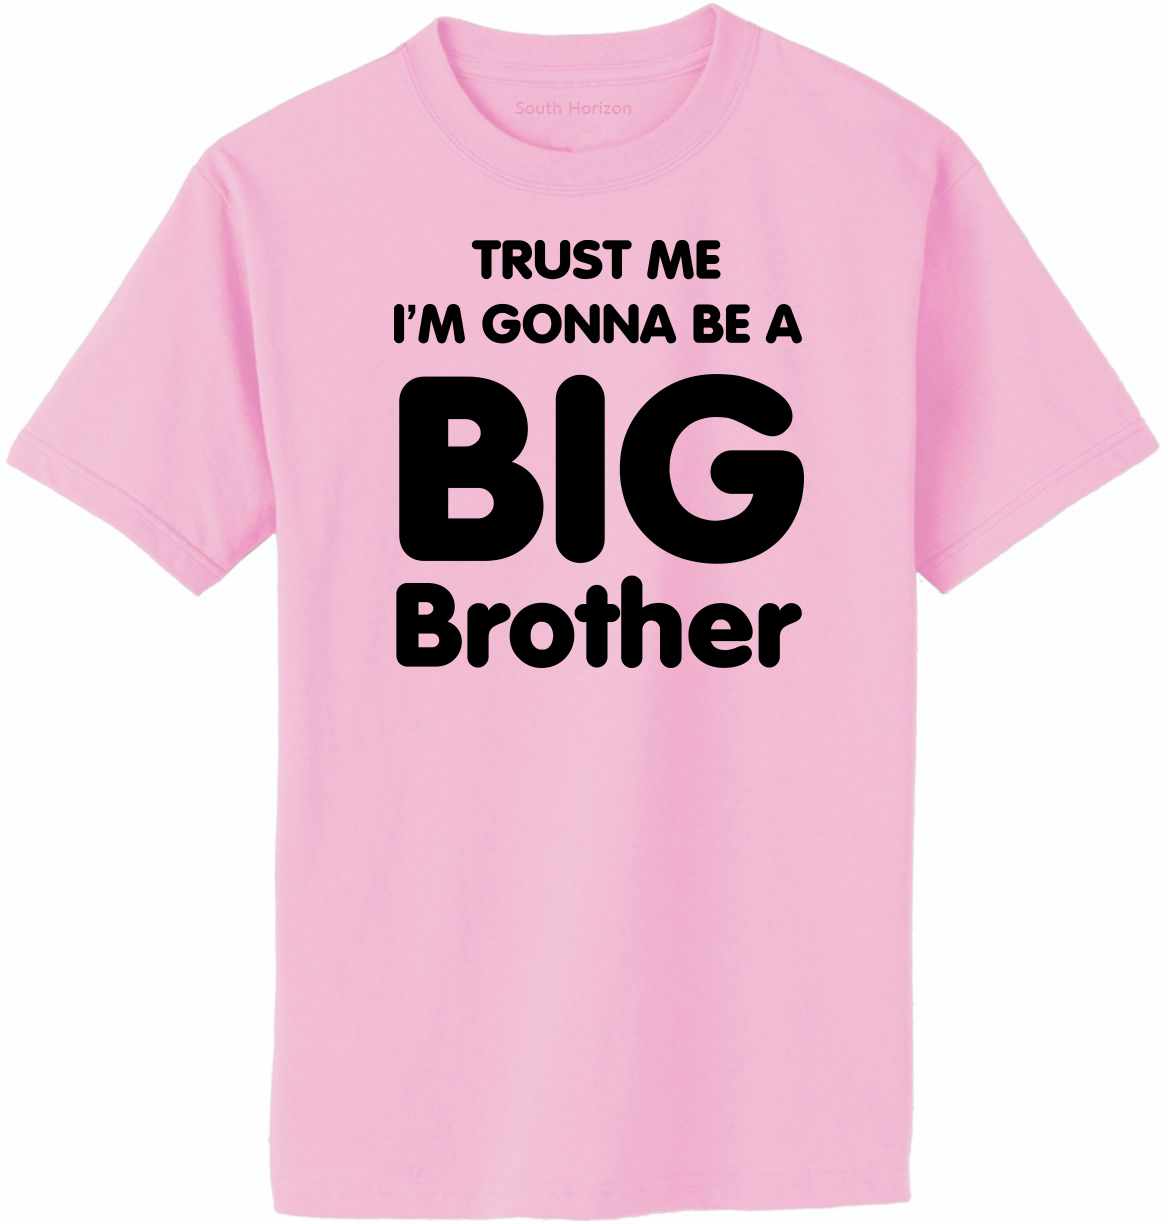 Trust Me I'm Gonna be a Big Brother Adult T-Shirt (#810-1)